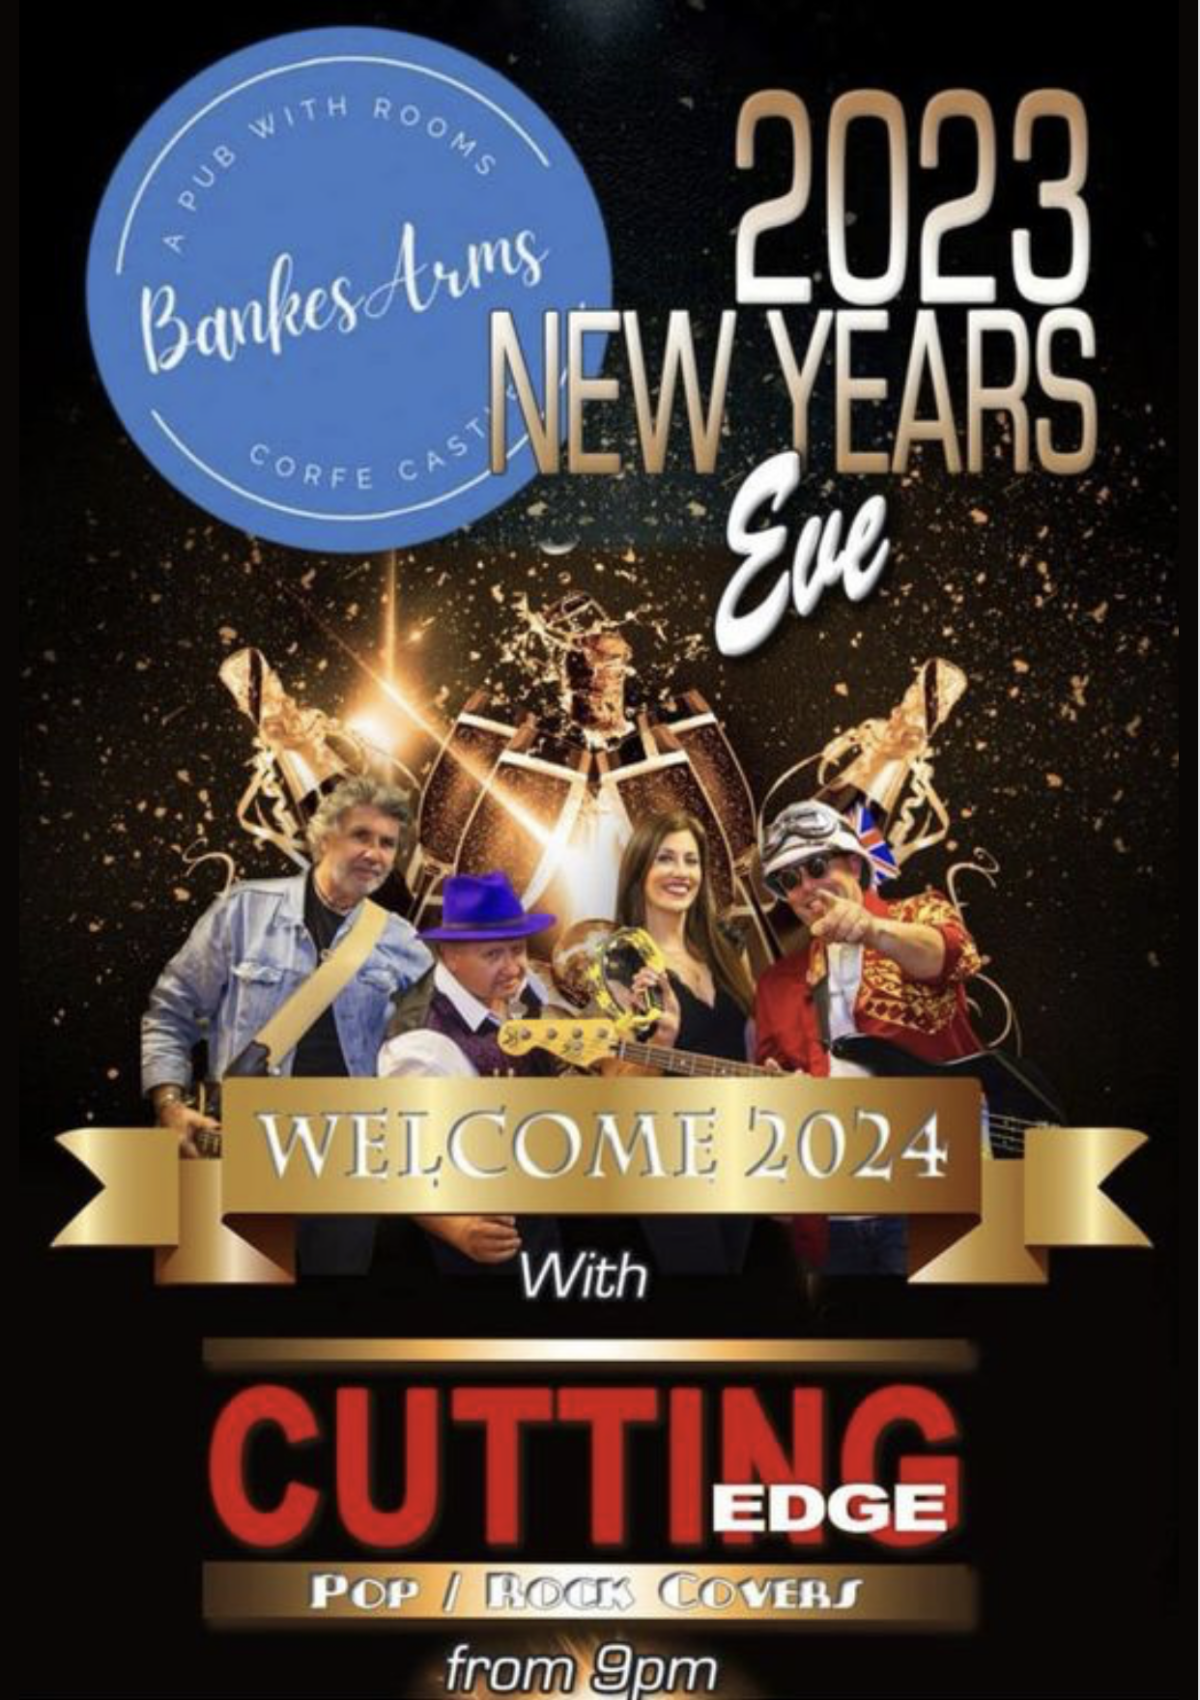 Welcome 2024 with Cutting Edge at The Bankes in Corfe